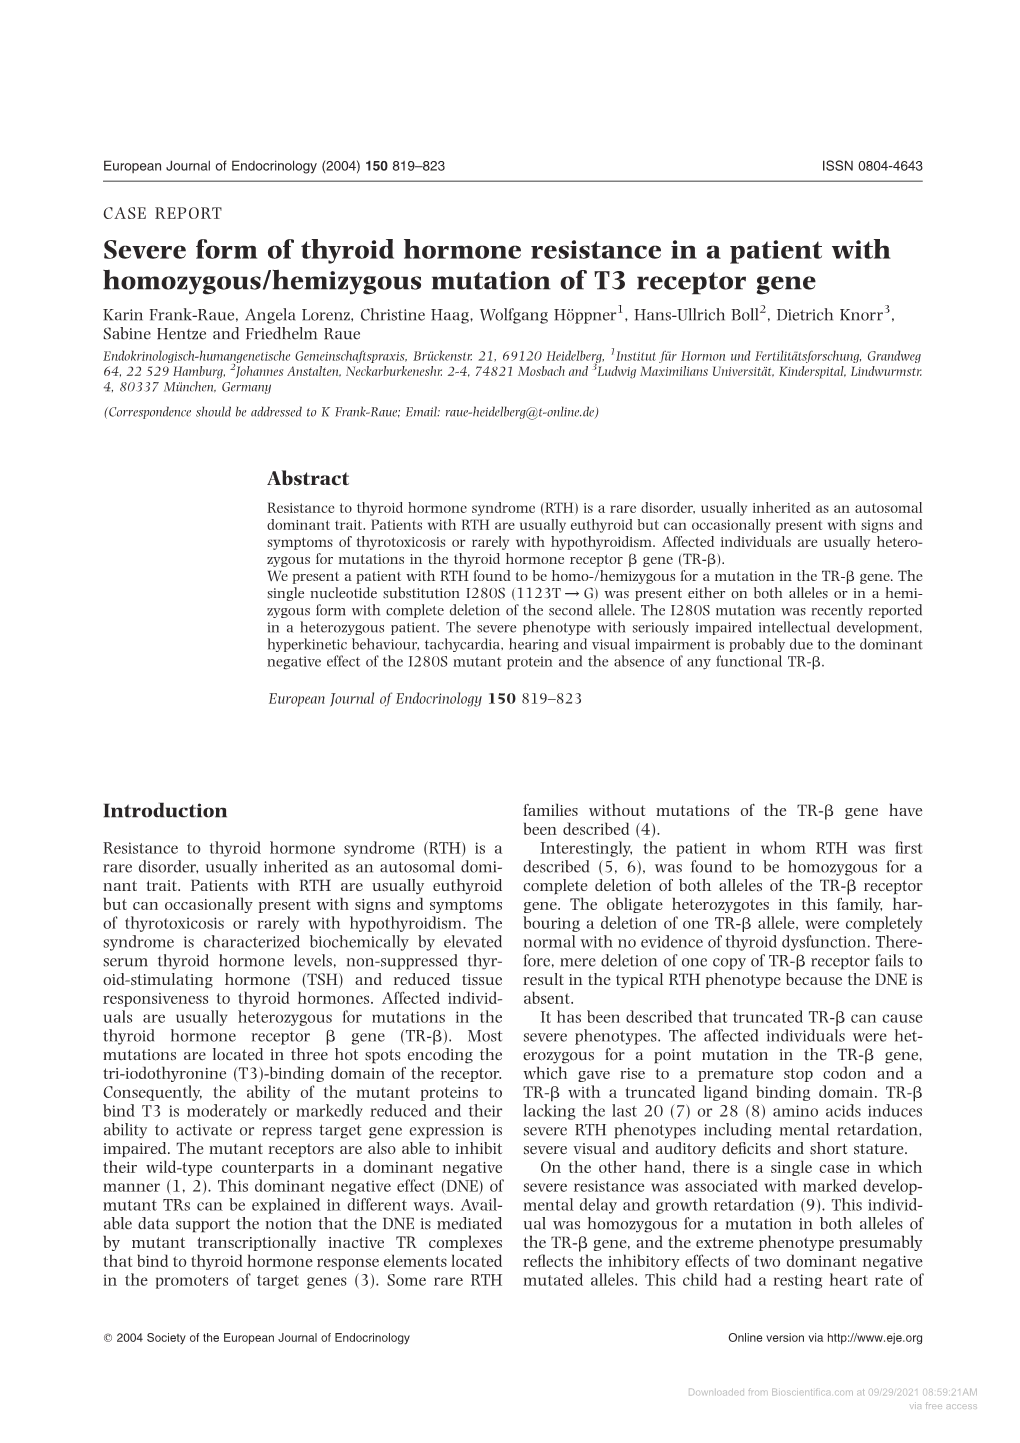 Severe Form of Thyroid Hormone Resistance in a Patient With